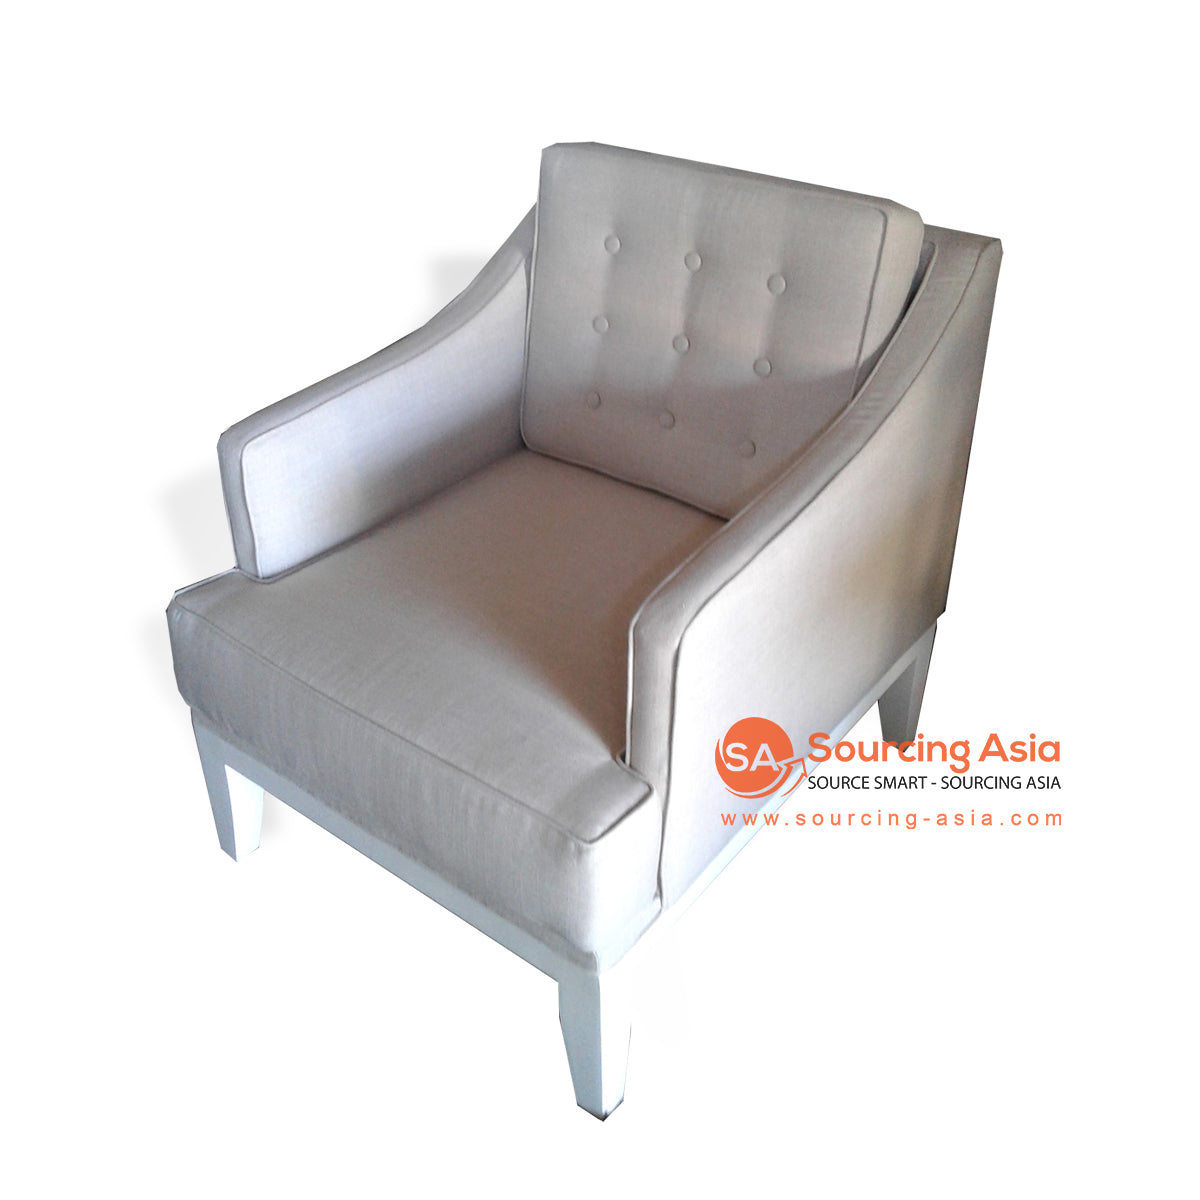 BCCH001-3 WHITE FABRIC AND TEAK WOOD UPHOLSTERED SINGLE SEAT CHAIR (PRICE WITHOUT FABRIC)